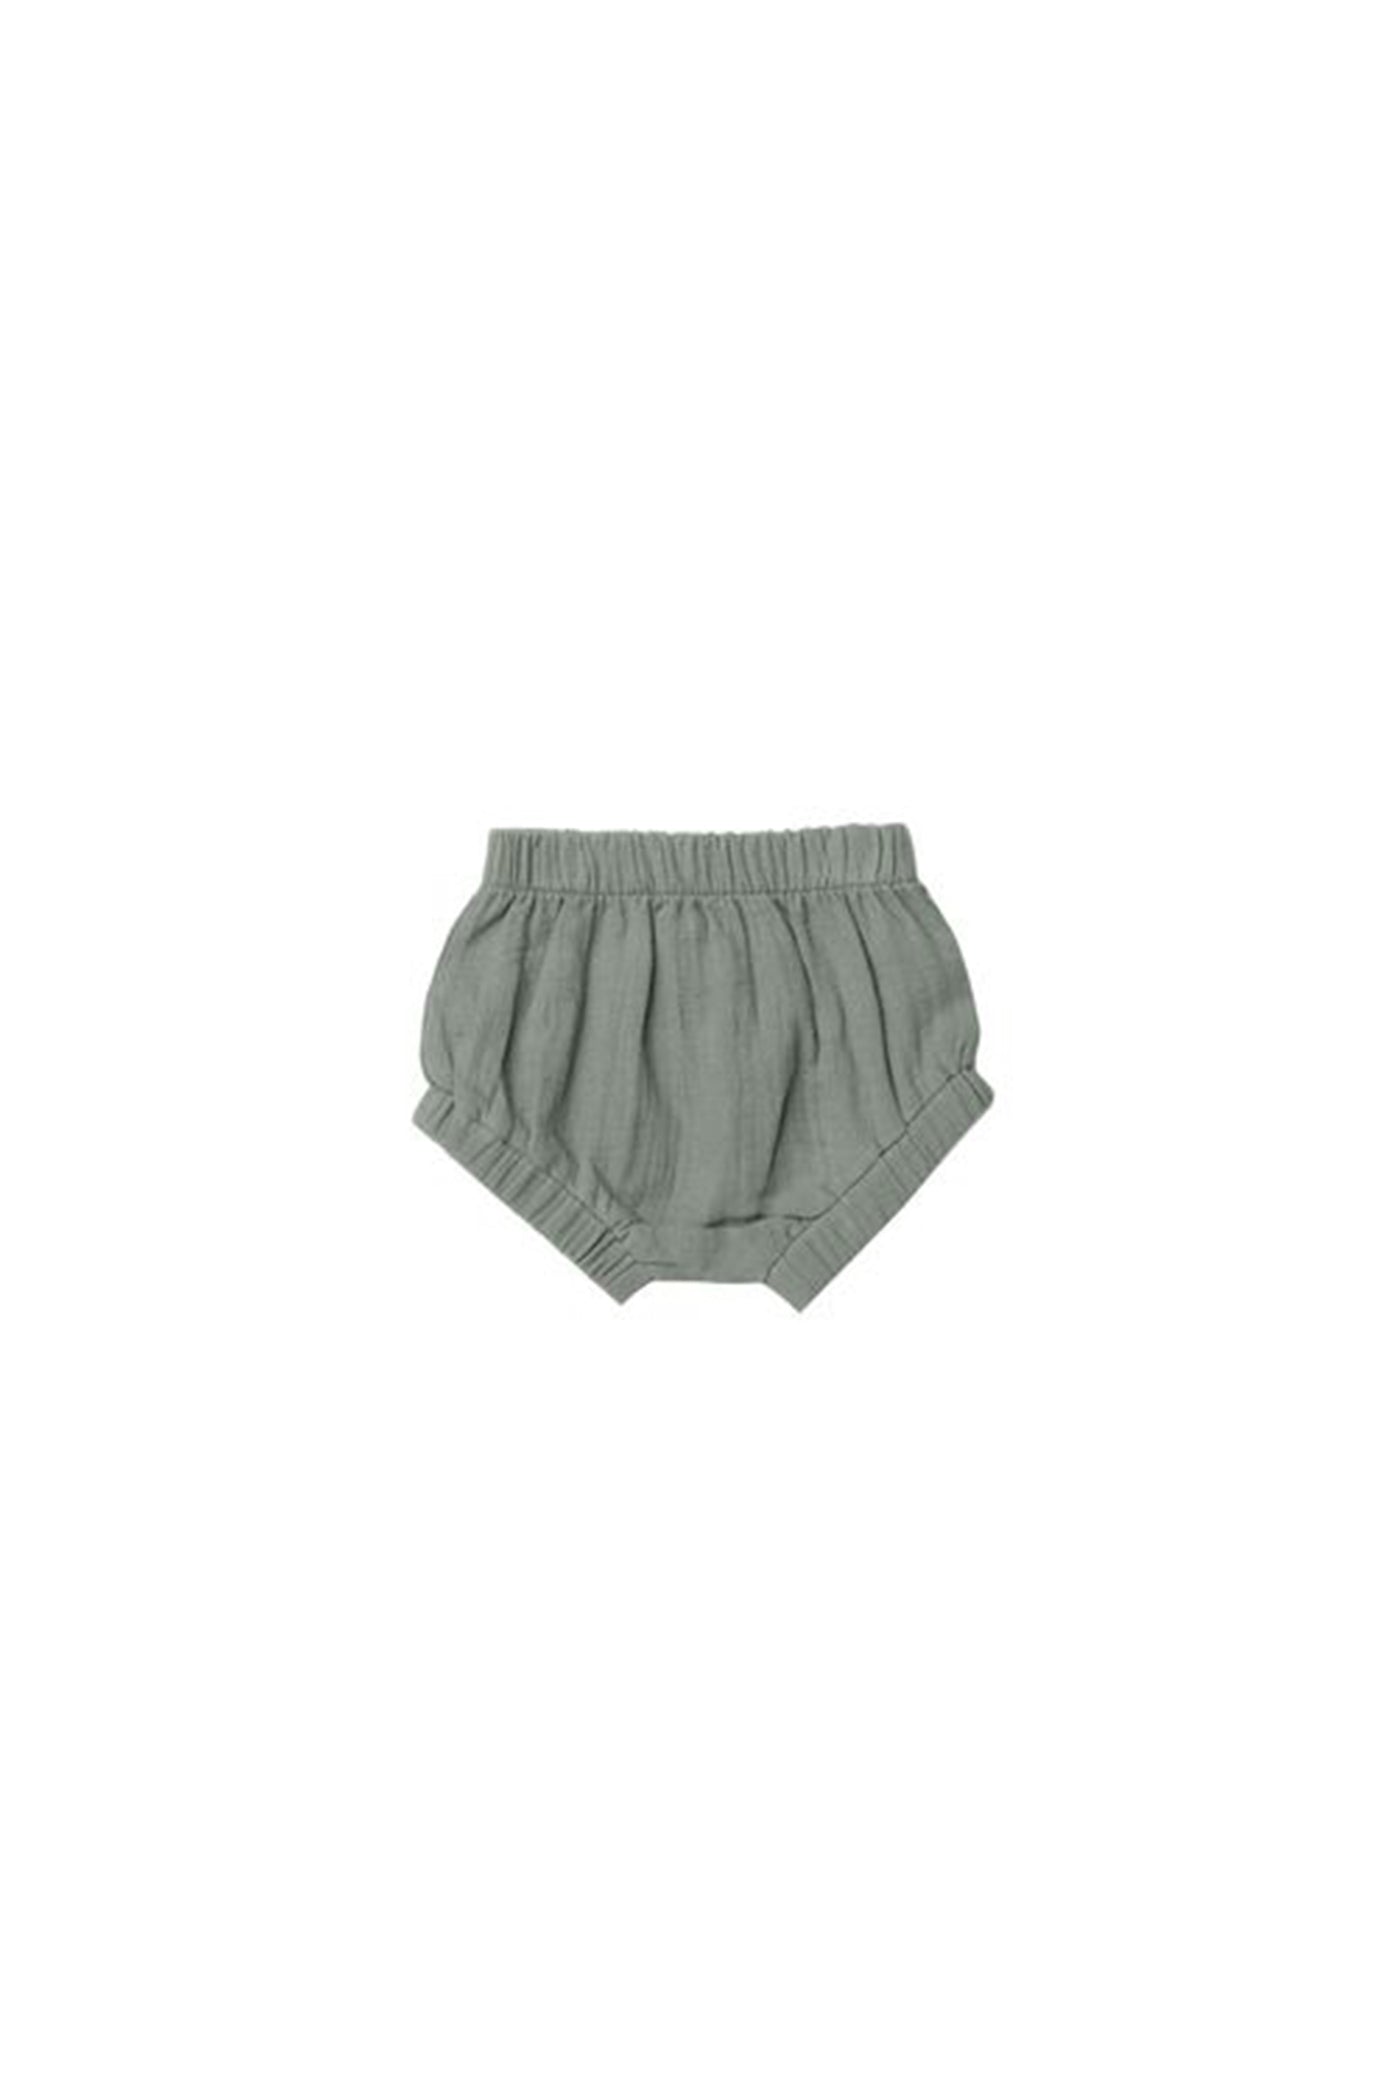 Woven Button Kids Shorts by Quincy Mae